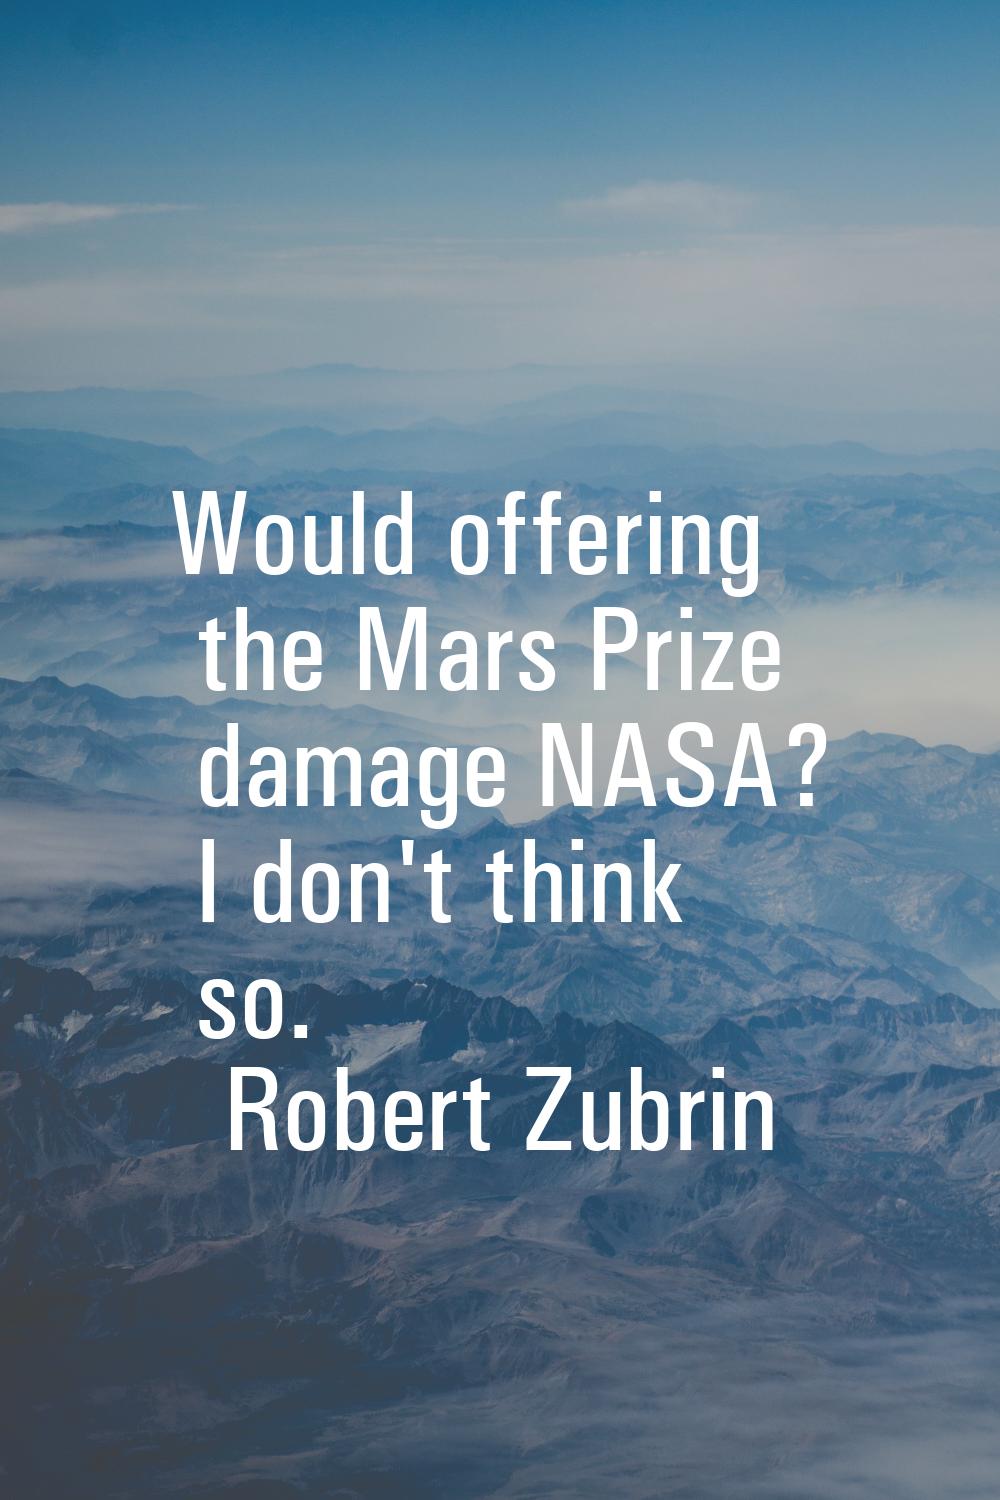 Would offering the Mars Prize damage NASA? I don't think so.